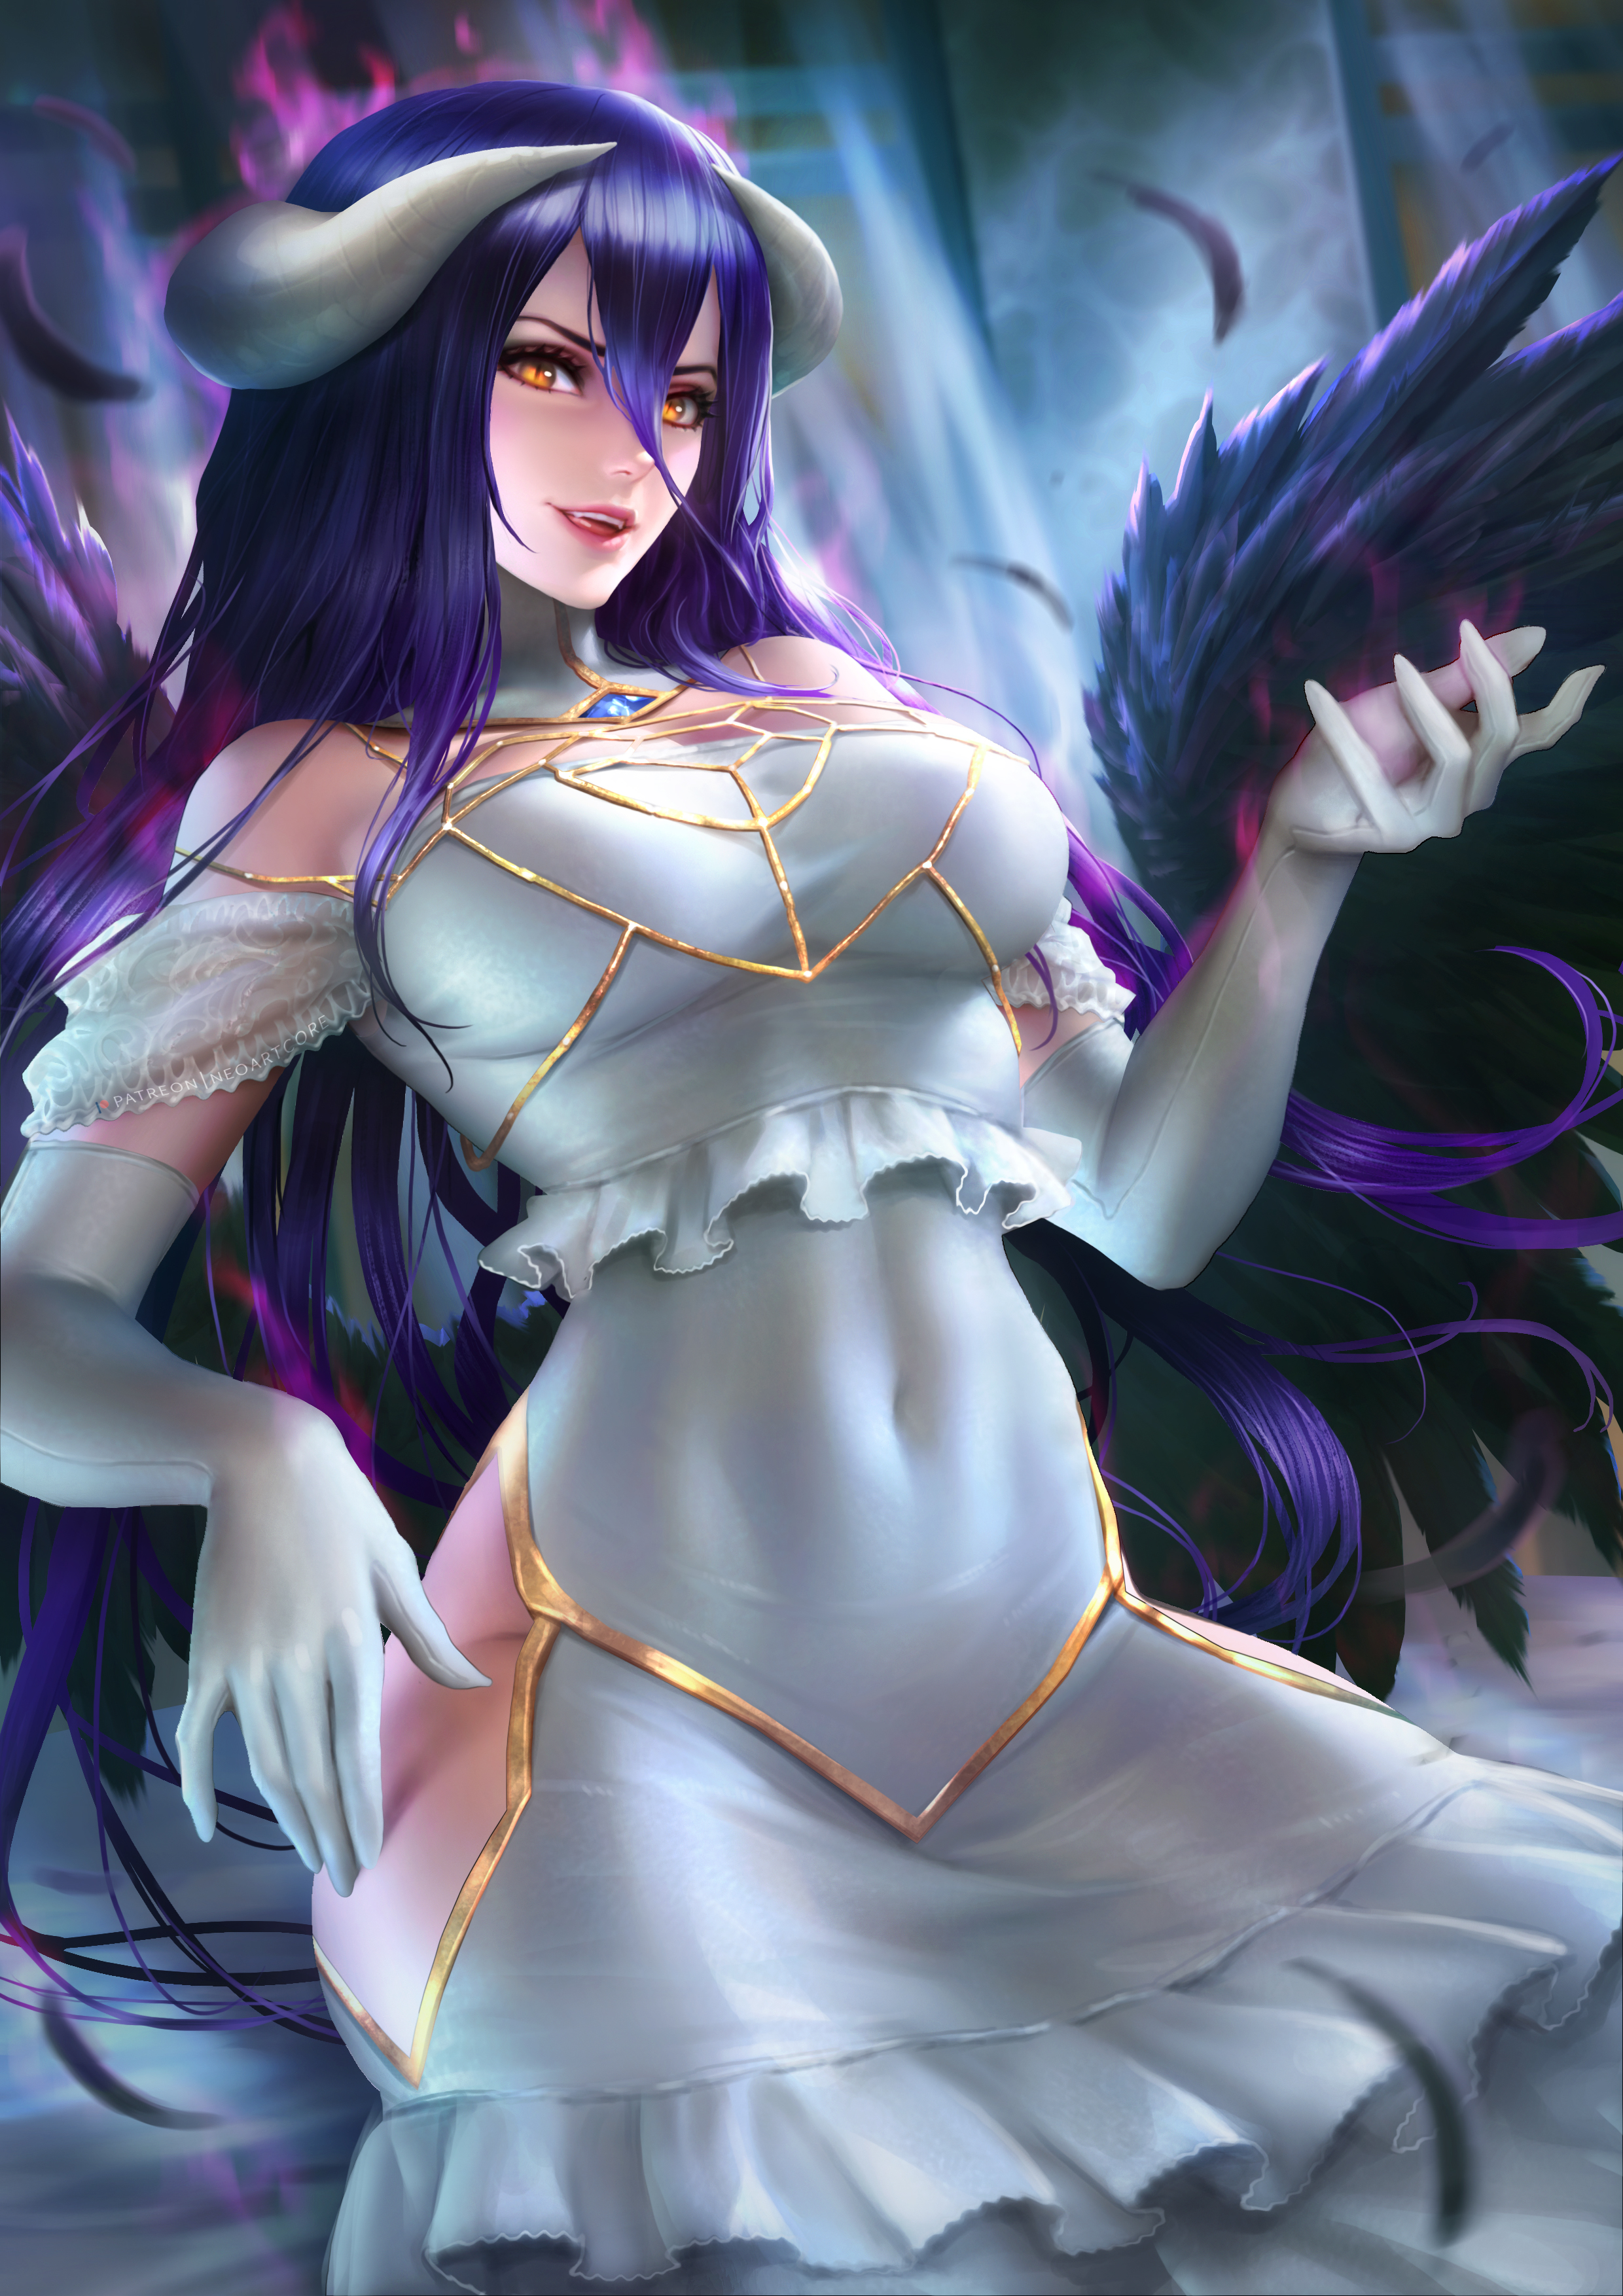 Anime 2480x3508 Albedo (OverLord) Overlord (anime) anime anime girls dark hair long hair horns fantasy girl succubus wings feathers looking at viewer yellow eyes smiling fangs dress white clothing white dress elbow gloves white gloves portrait display fantasy art illustration drawing artwork digital art fan art NeoArtCorE (artist) belly tight clothing